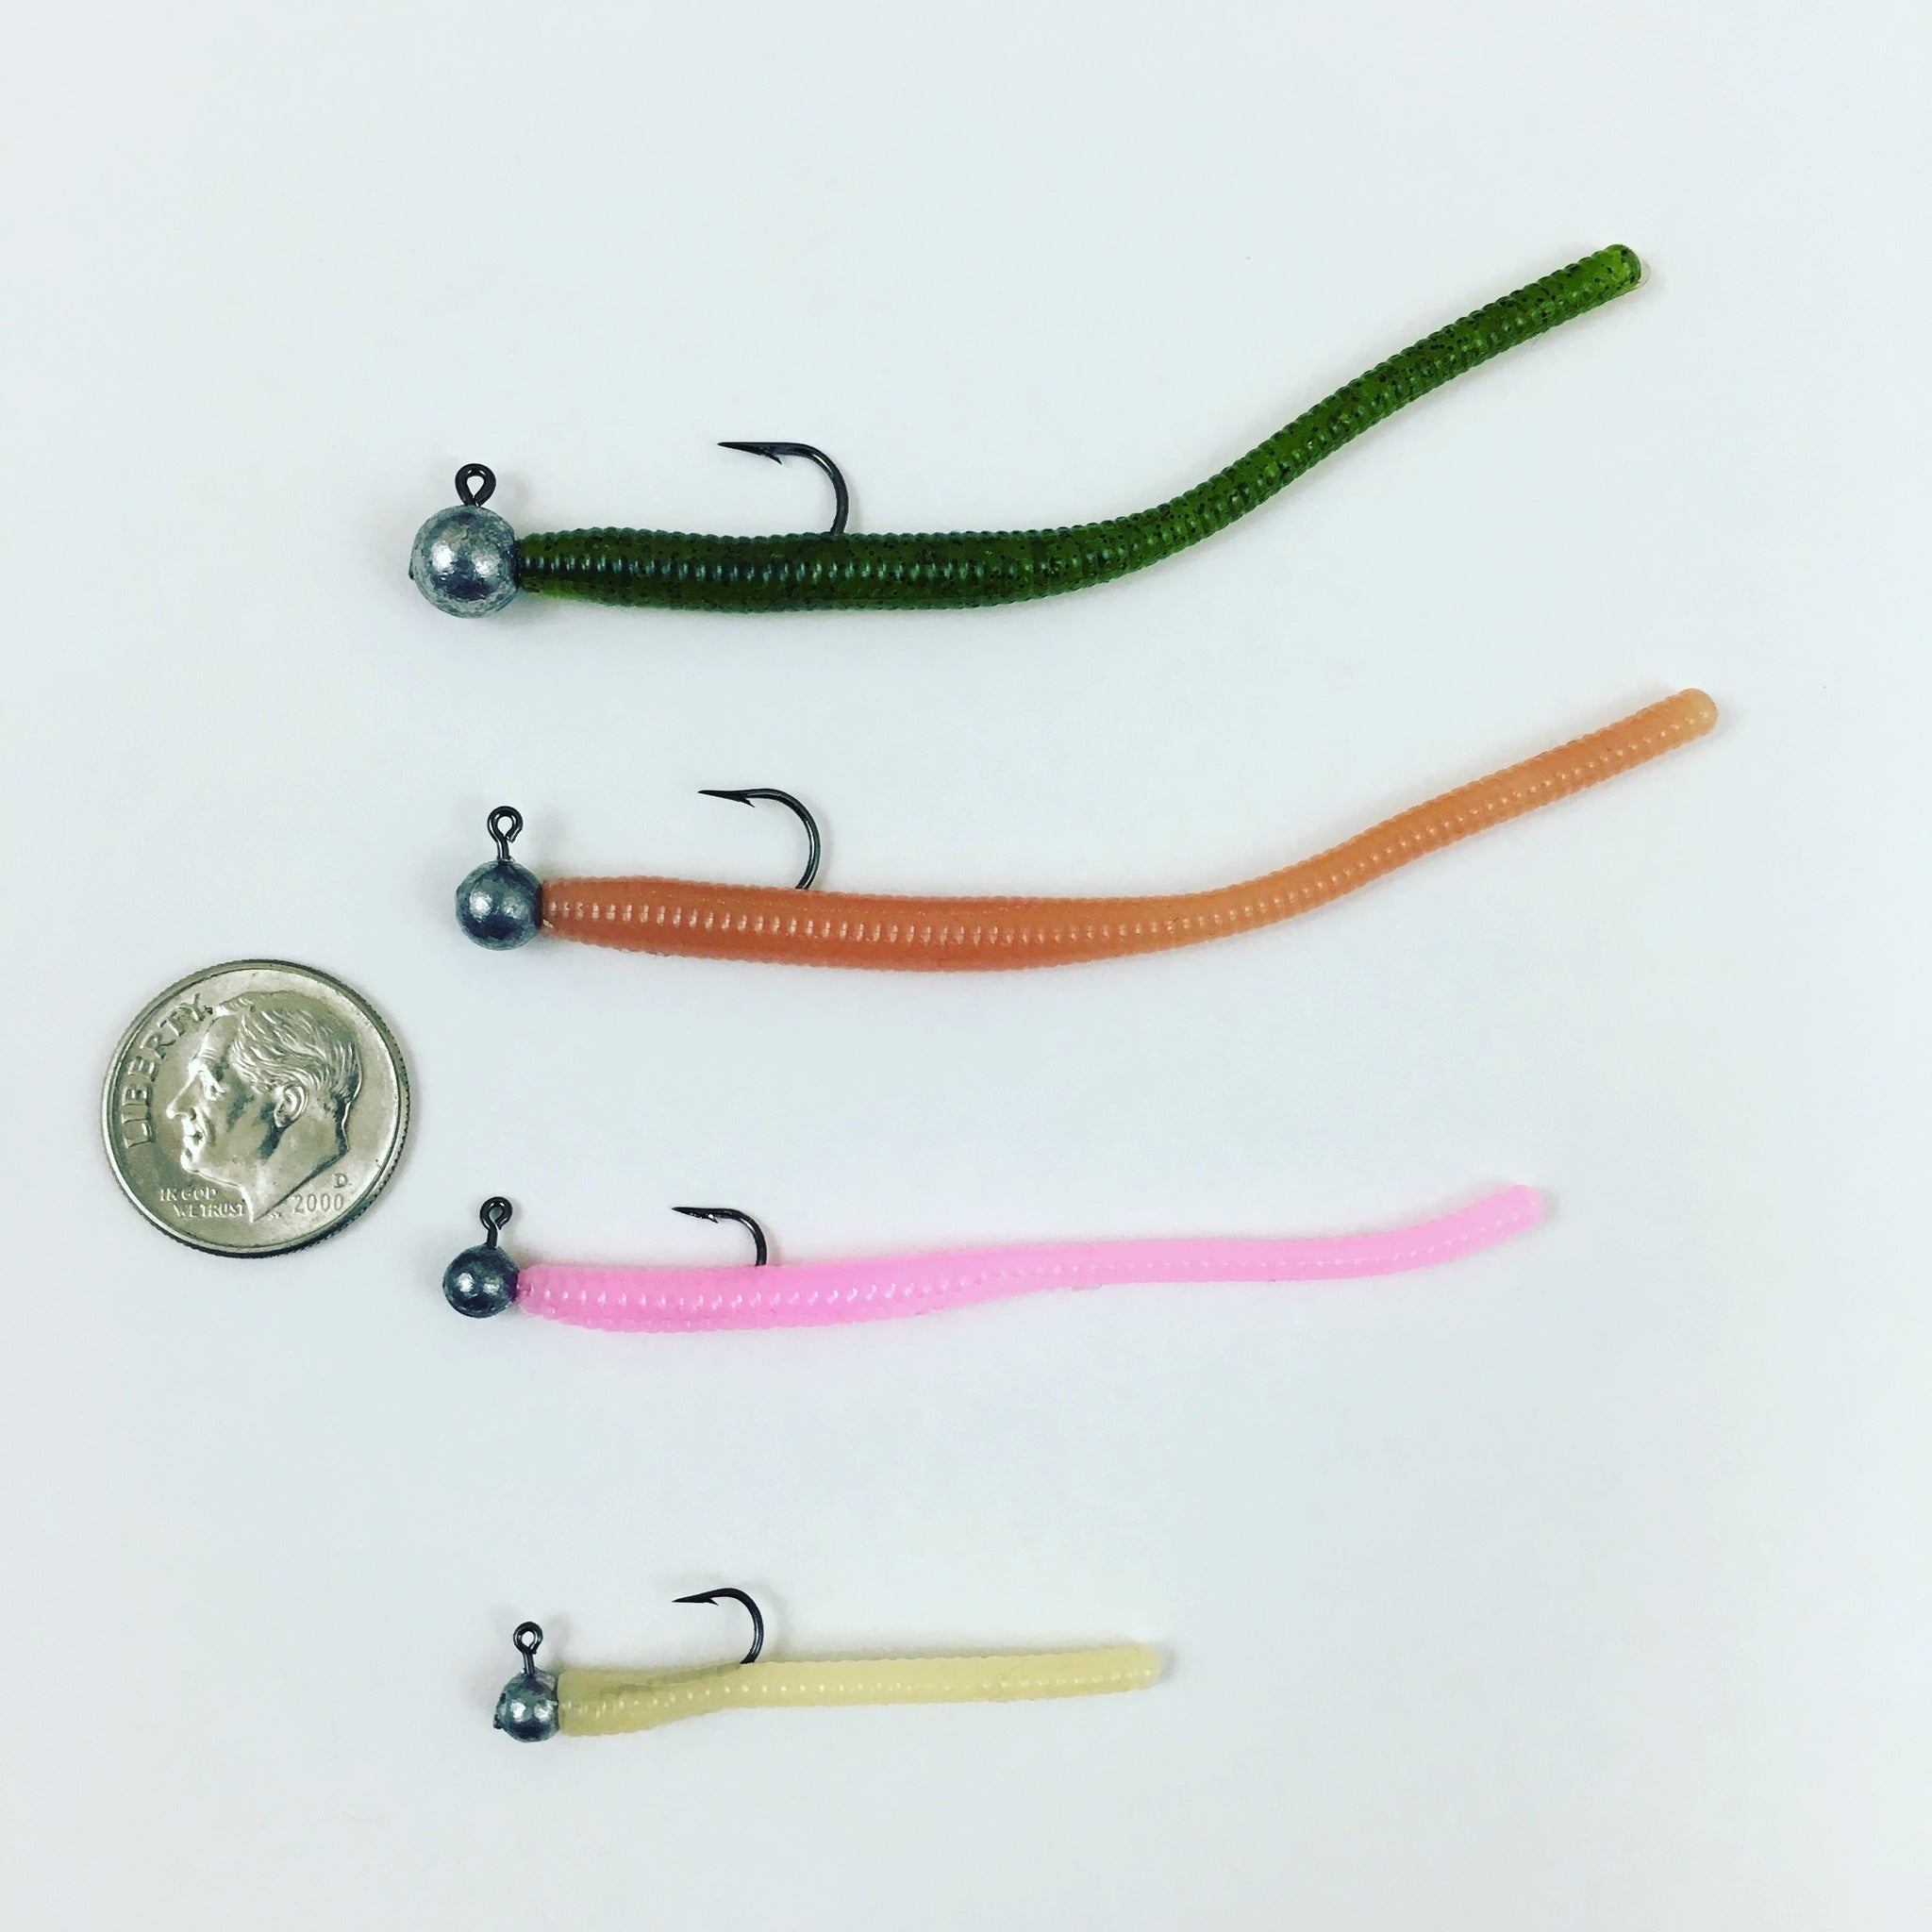 Super Floating Trout Worm: Electric Rainbow Trout – Peter's Custom